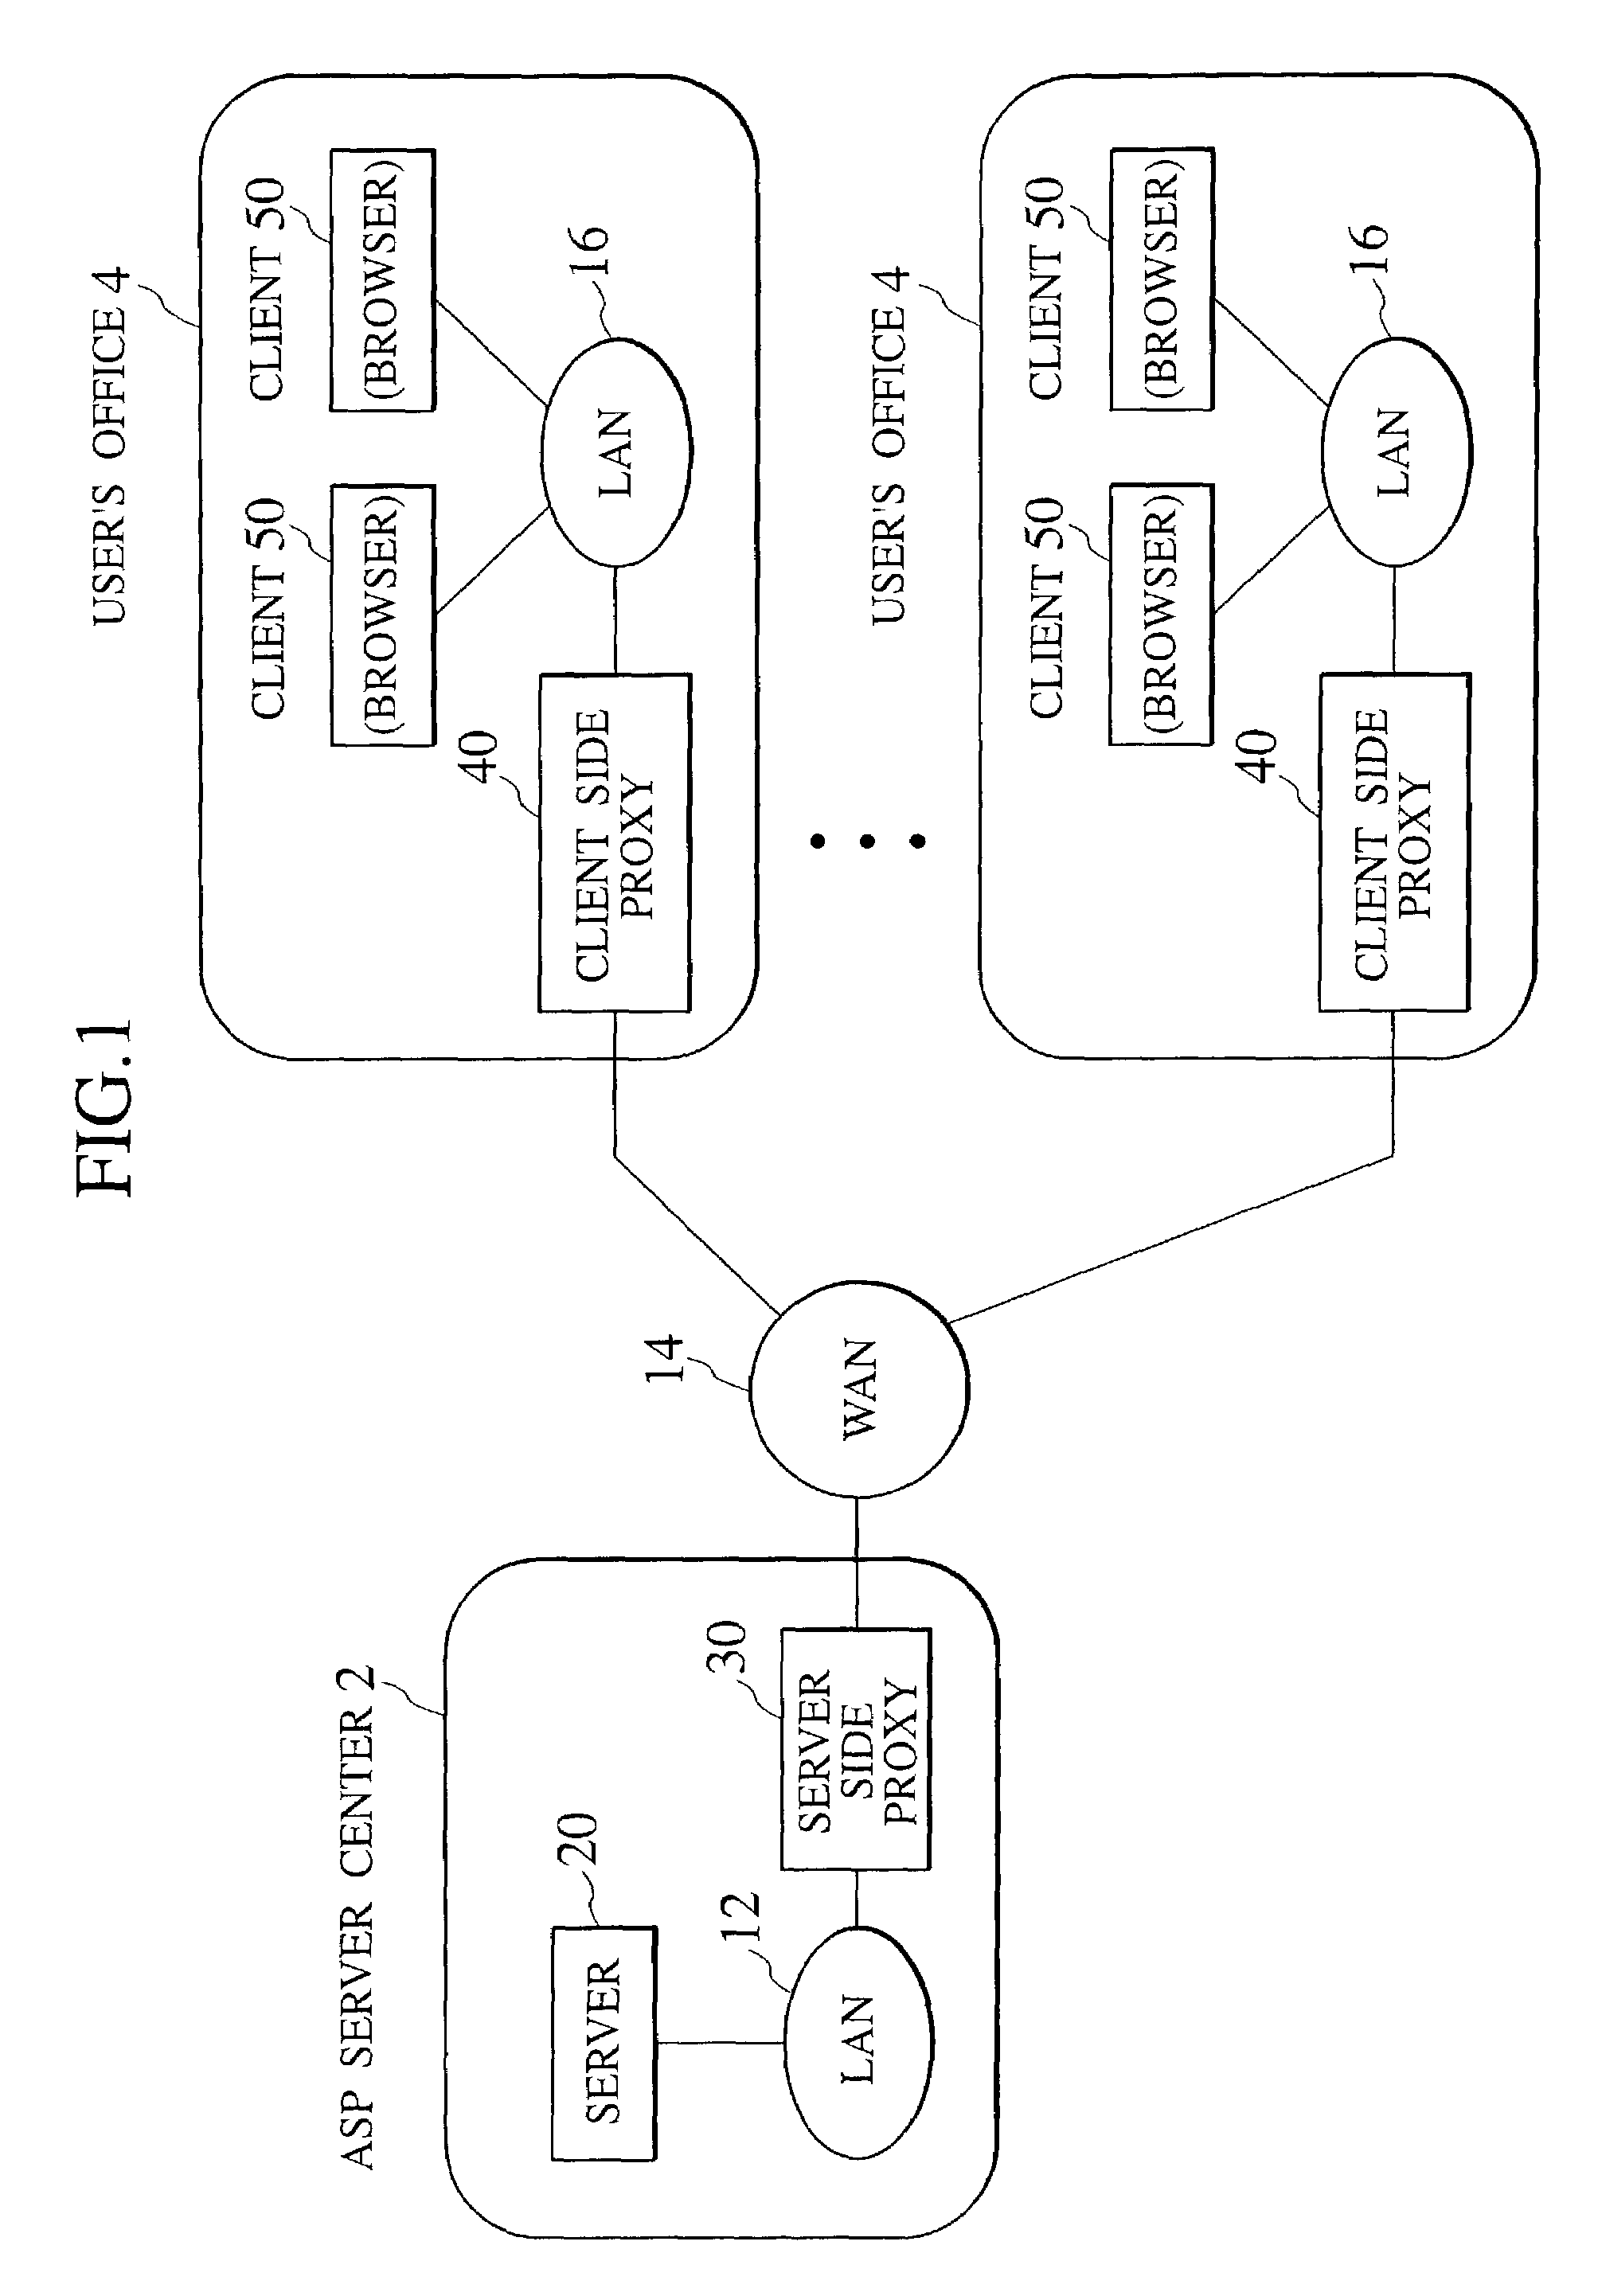 Data transfer scheme using caching technique for reducing network load